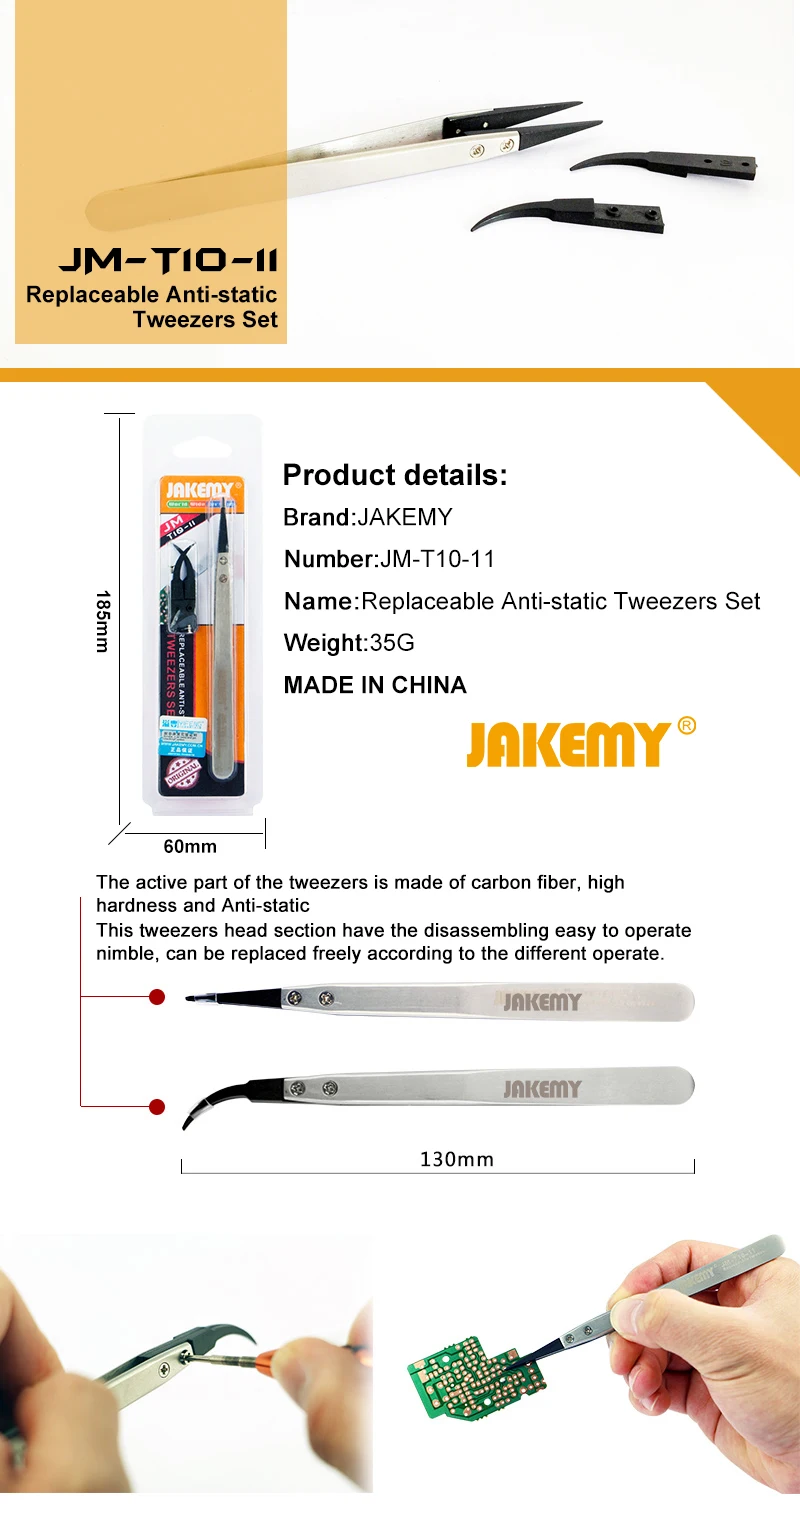 JAKEMY JM-T10-11 High Quality Replaceable Anti-static Stainless Steel Tweezers for Disassembling